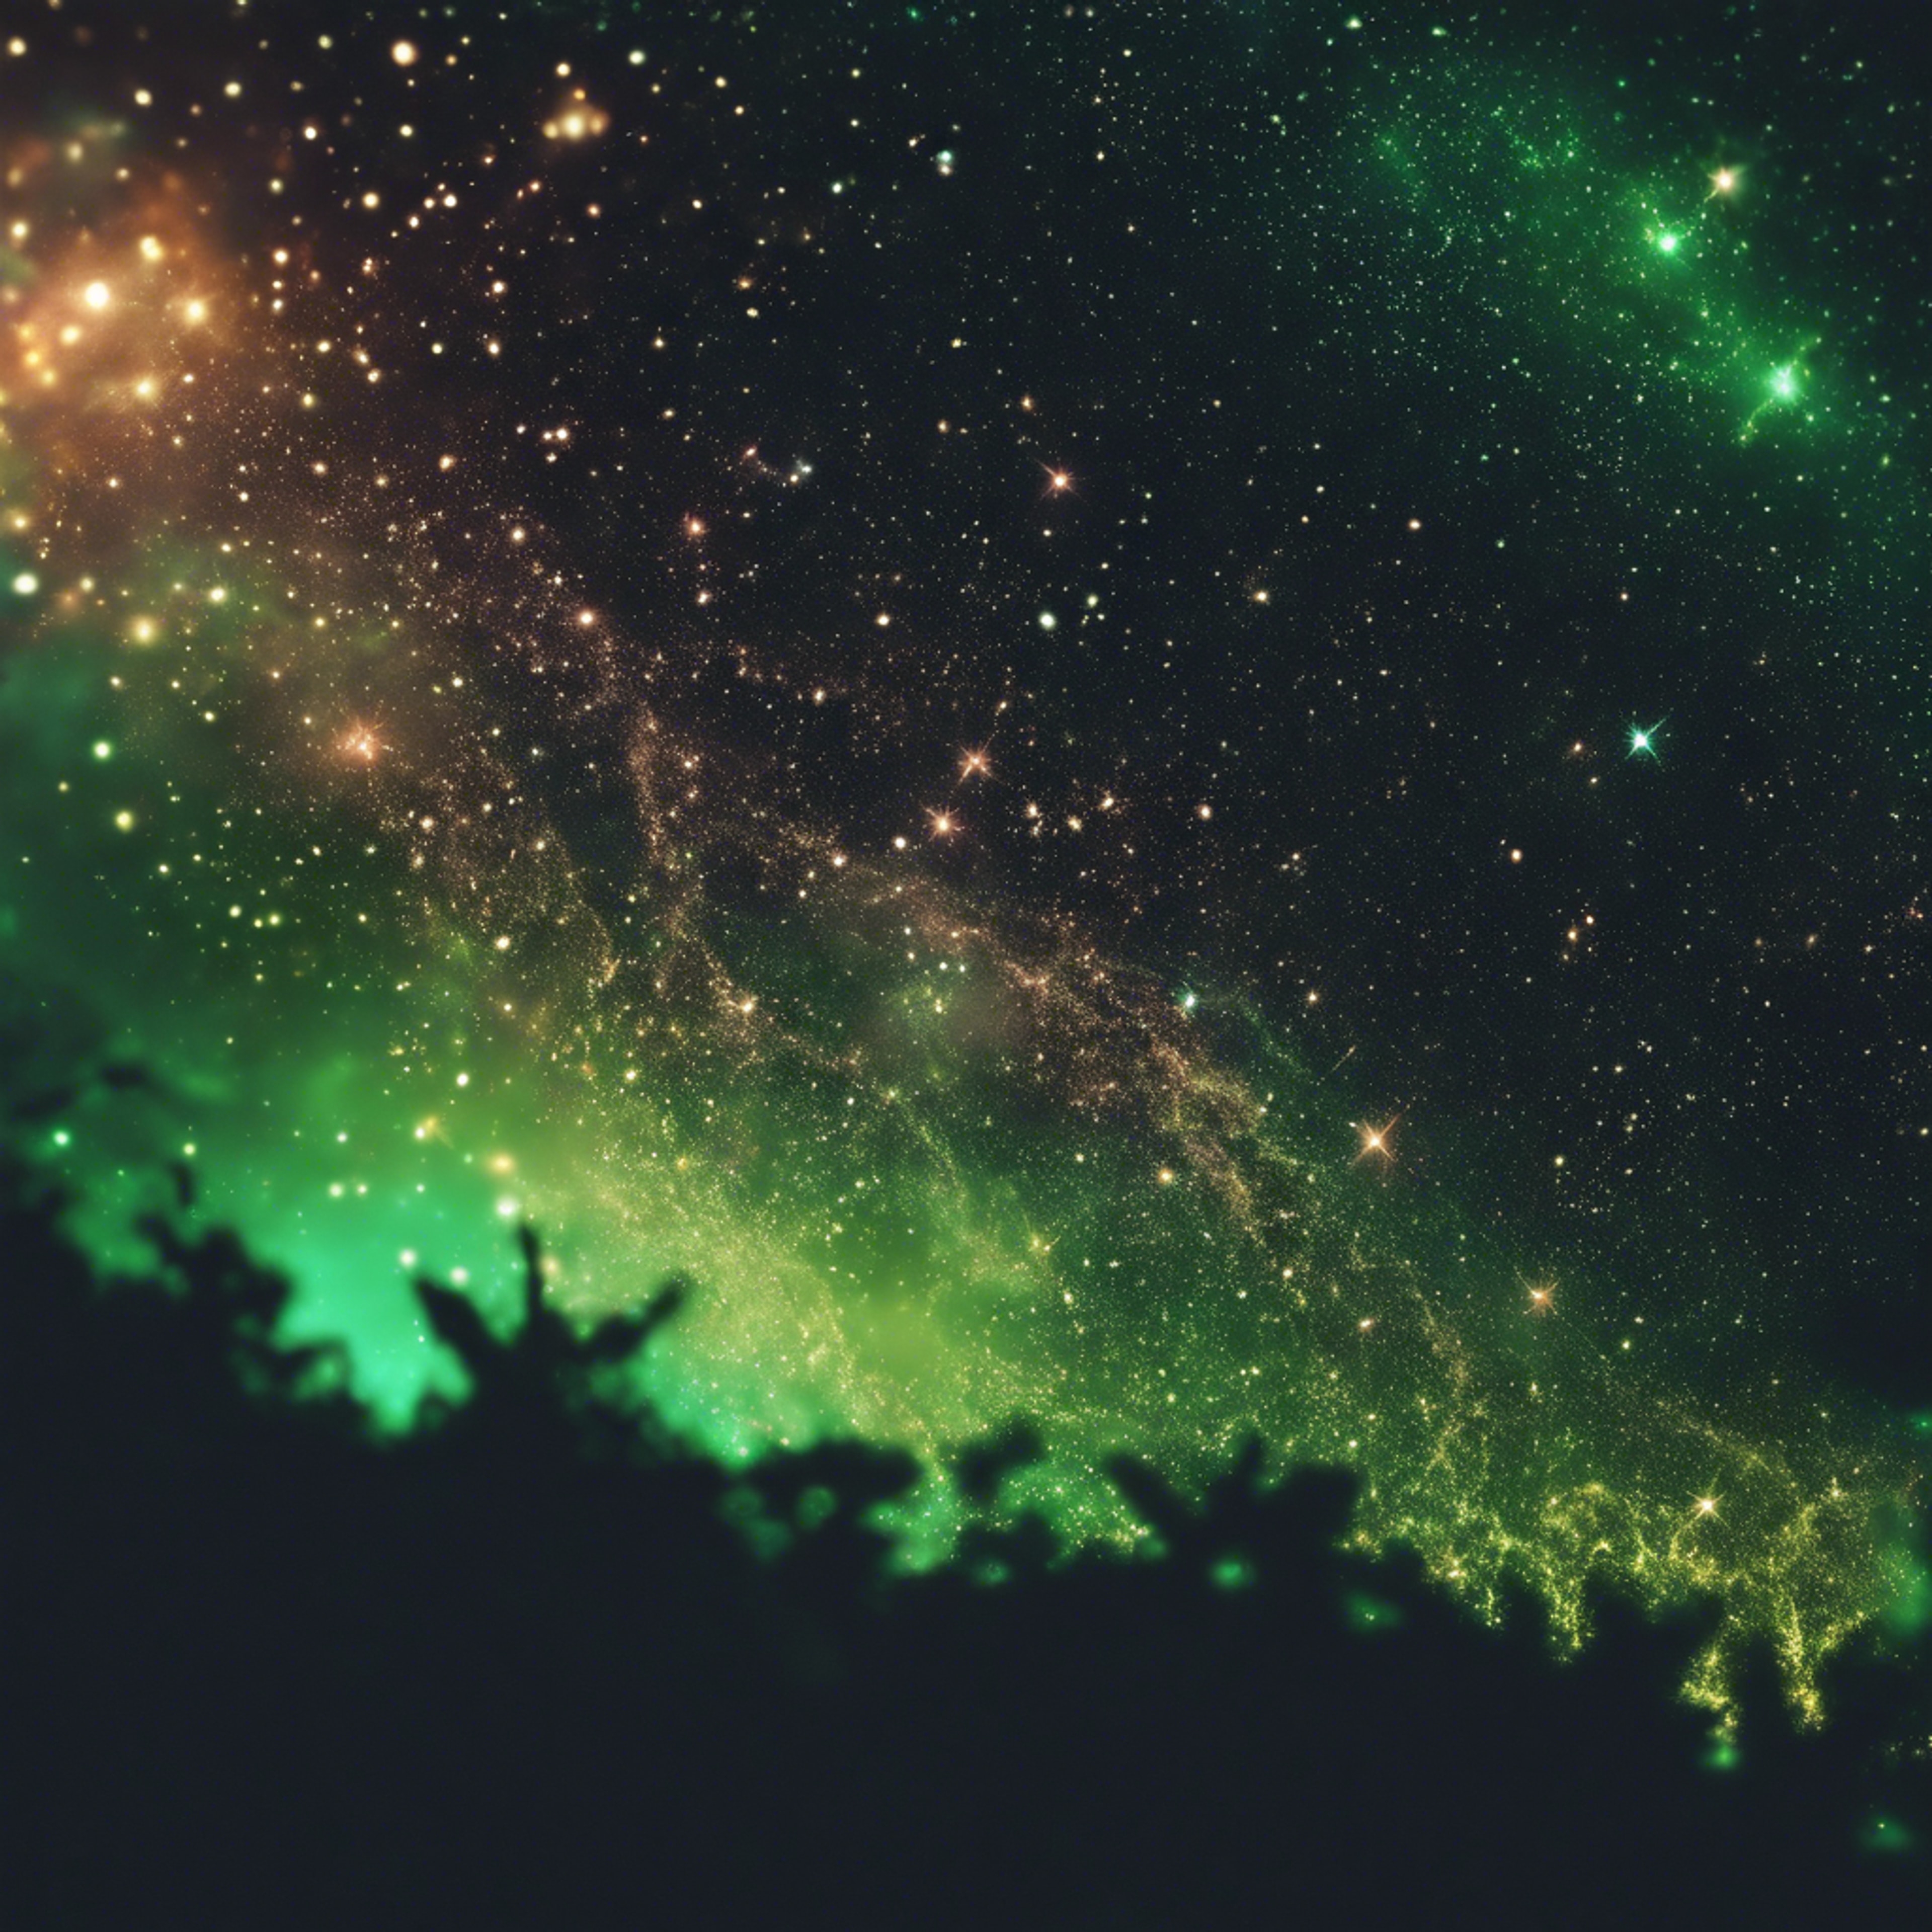 A galaxy seen from the edge of the universe, with cool neon green stars sparking in the darkness. Papel de parede[23da465cd95e430a971e]